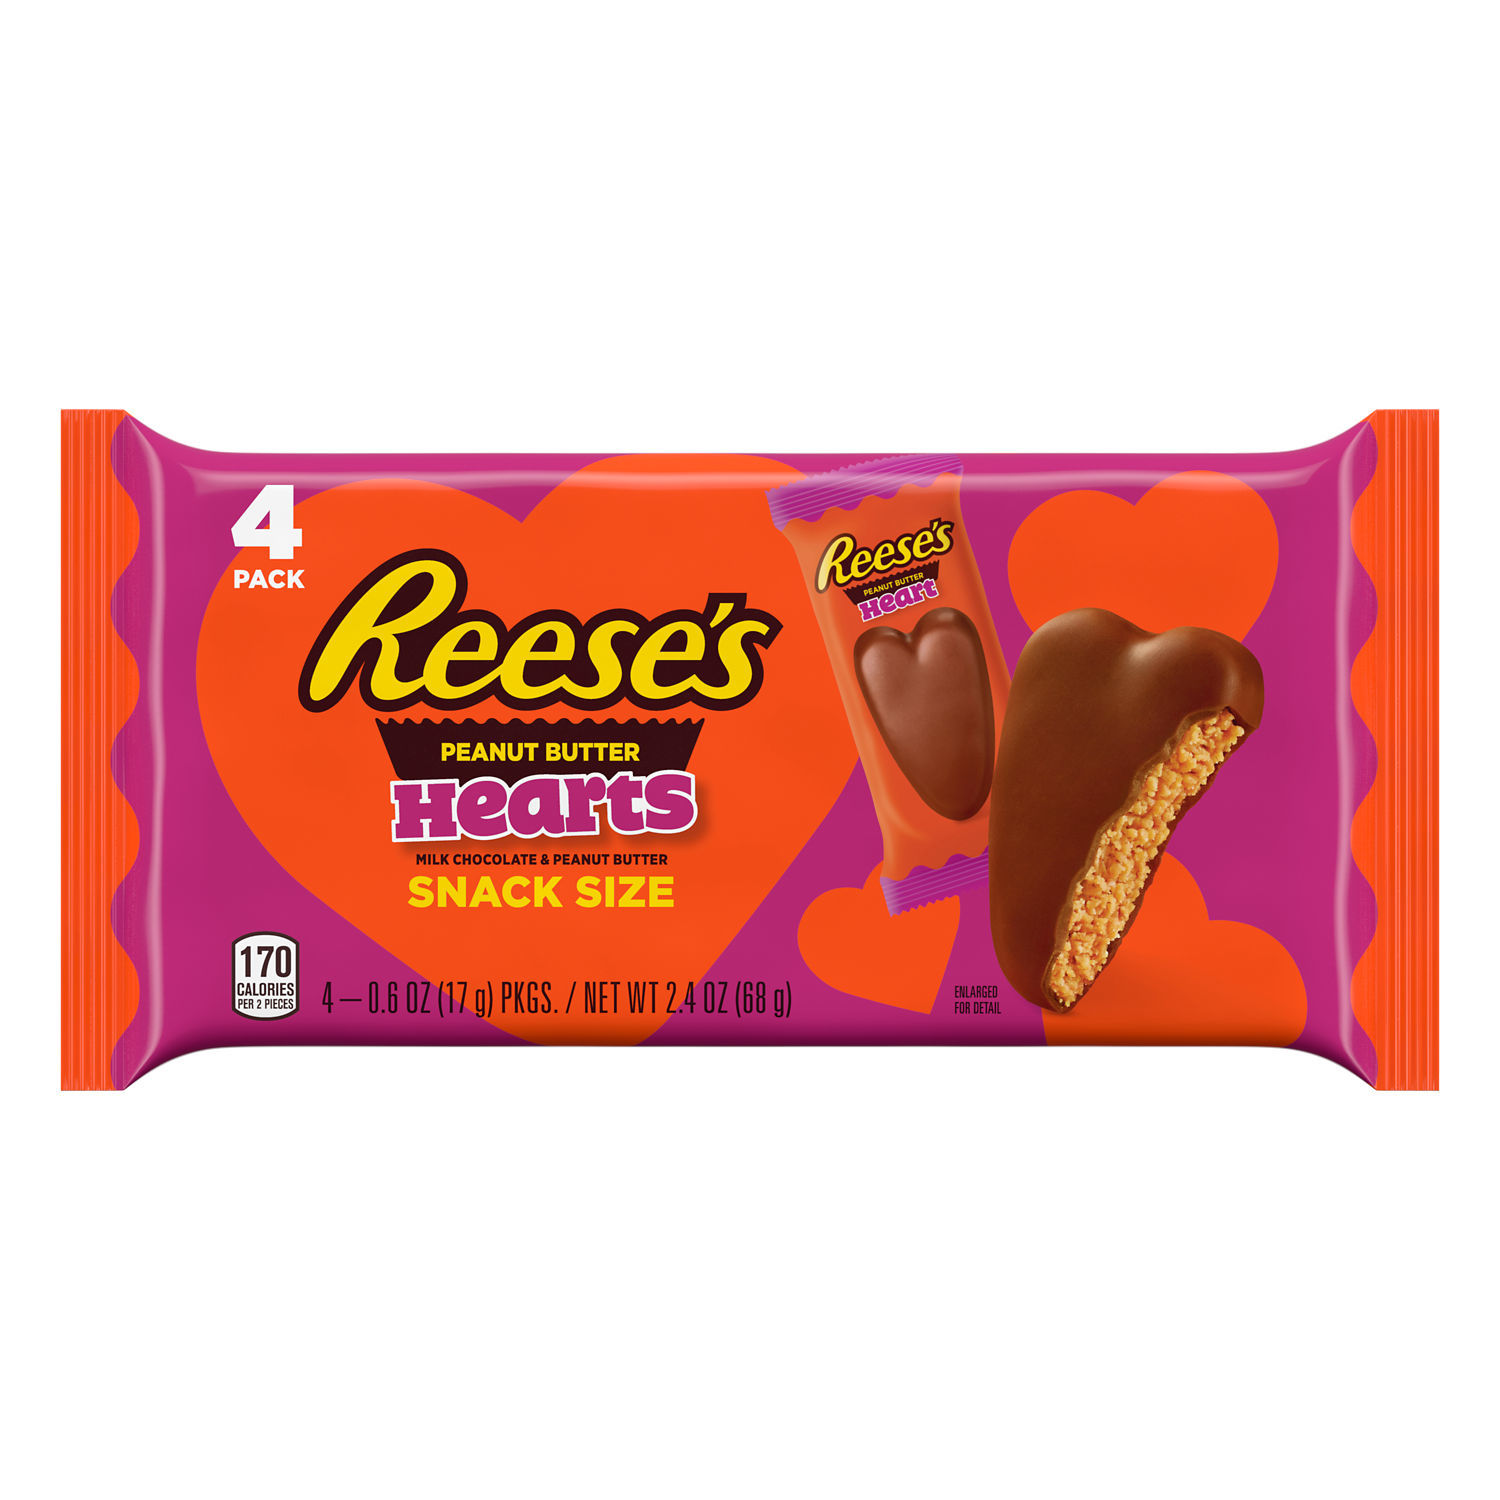 Reese's Milk Chocolate Peanut Butter Snack Size Hearts Valentine's Day Candy, Packs 0.6 oz, 4 Count - image 1 of 6